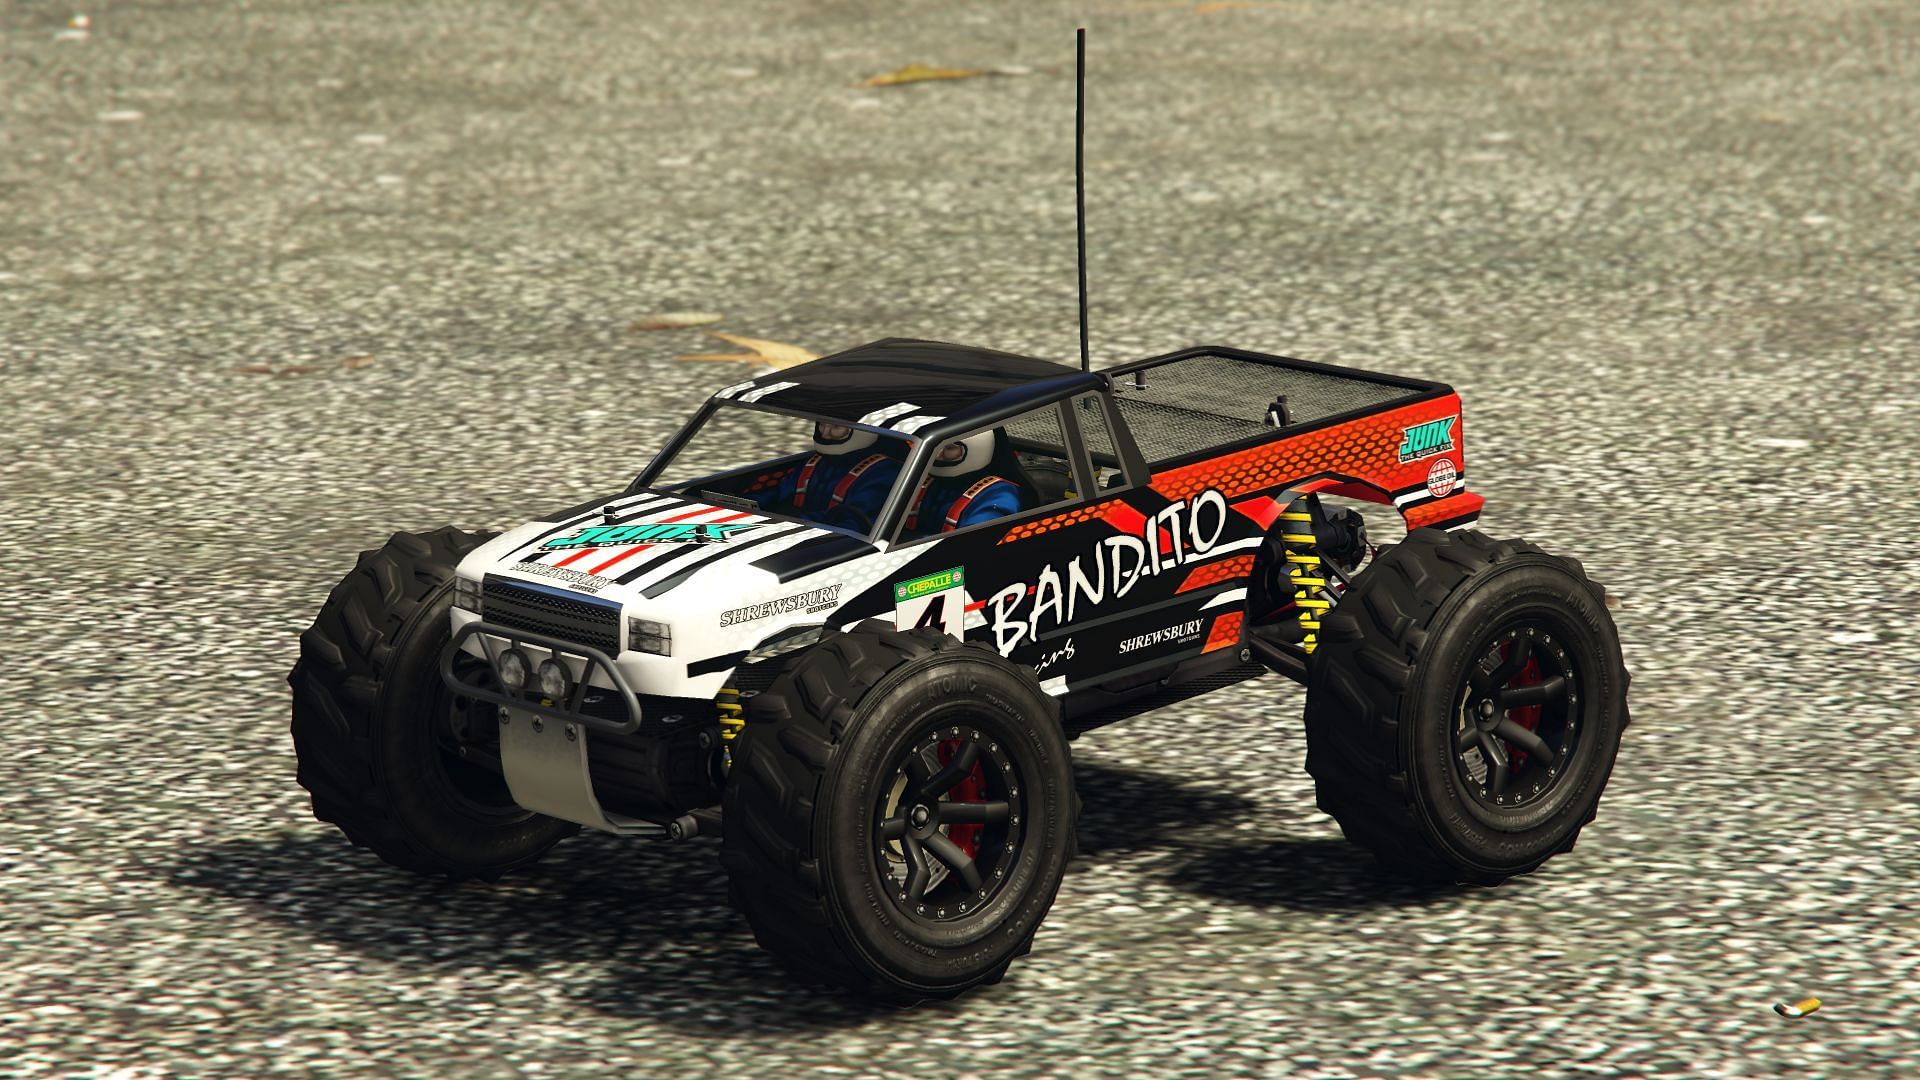 The RC Bandito is one of a few RC vehicles in GTA Online (Image via Rockstar Games)